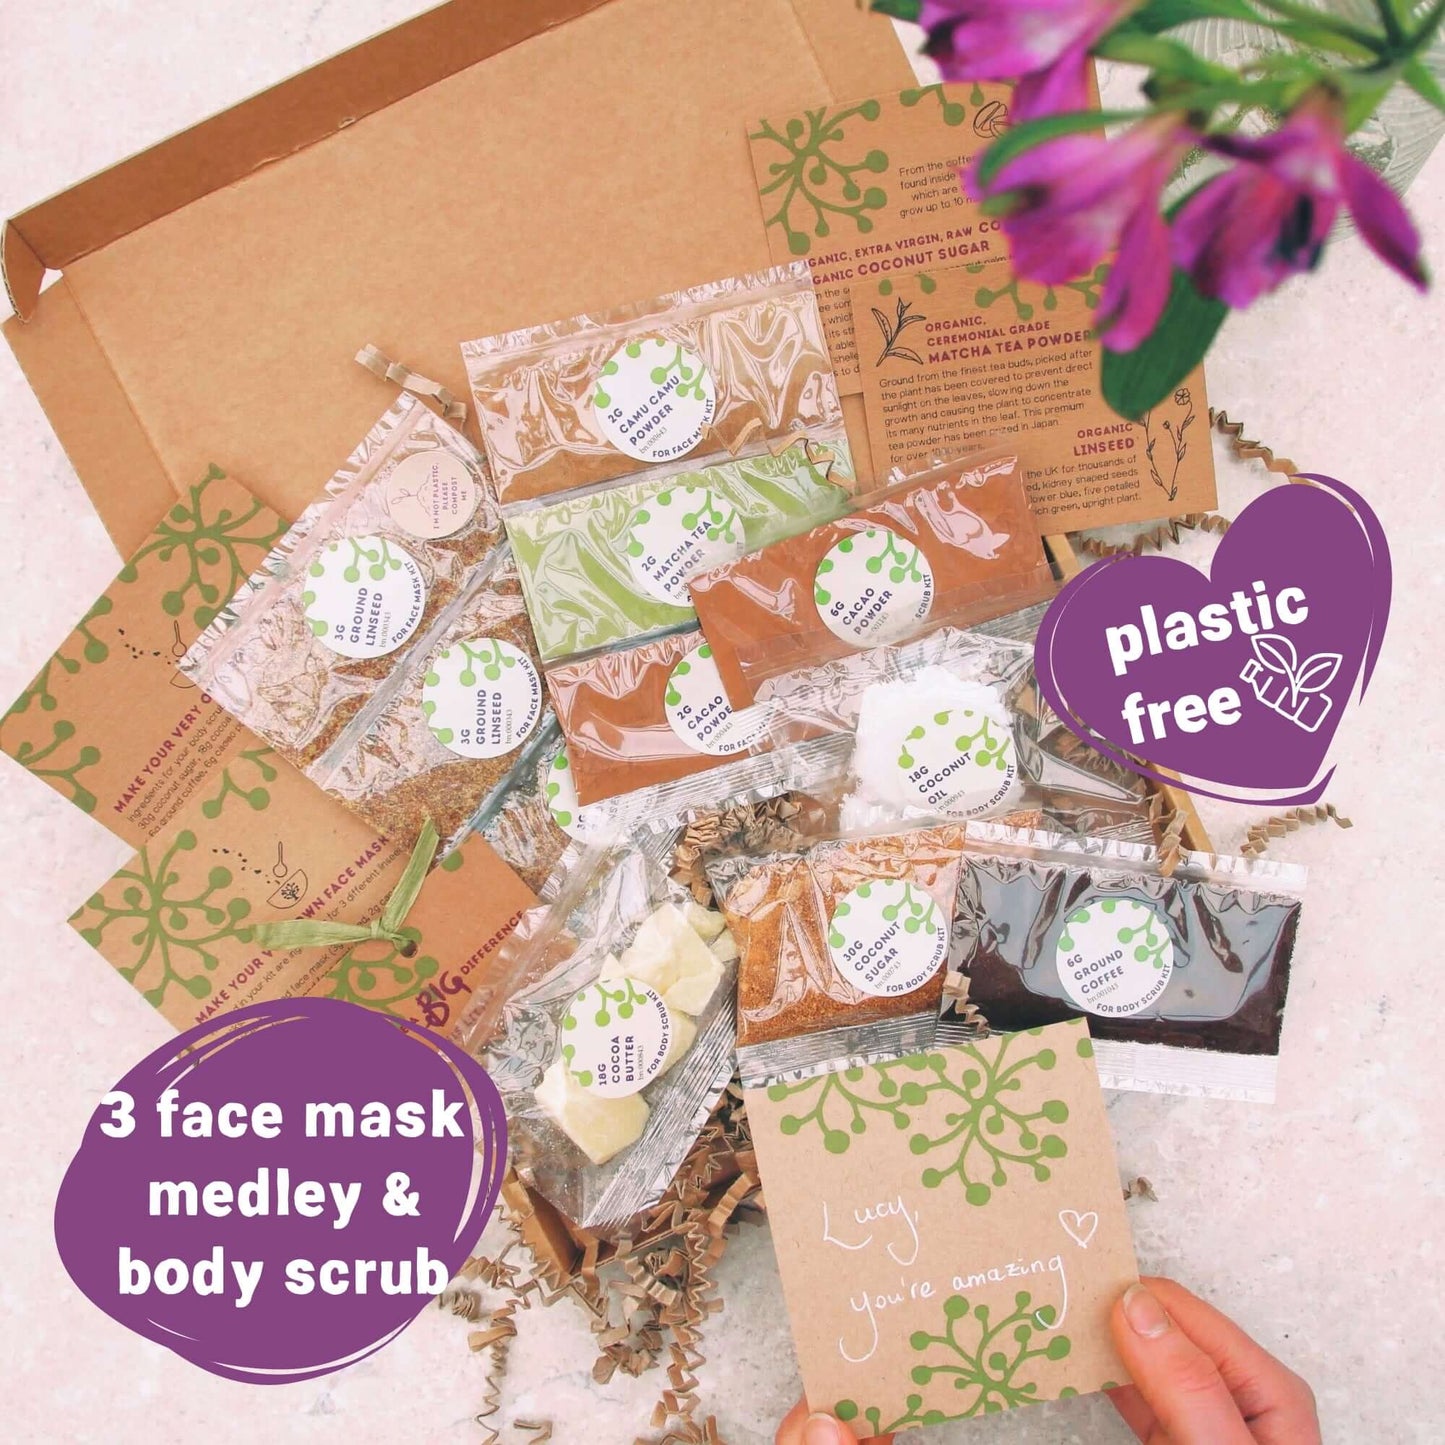 3 face mask and body scrub kit inside mum letterbox gift